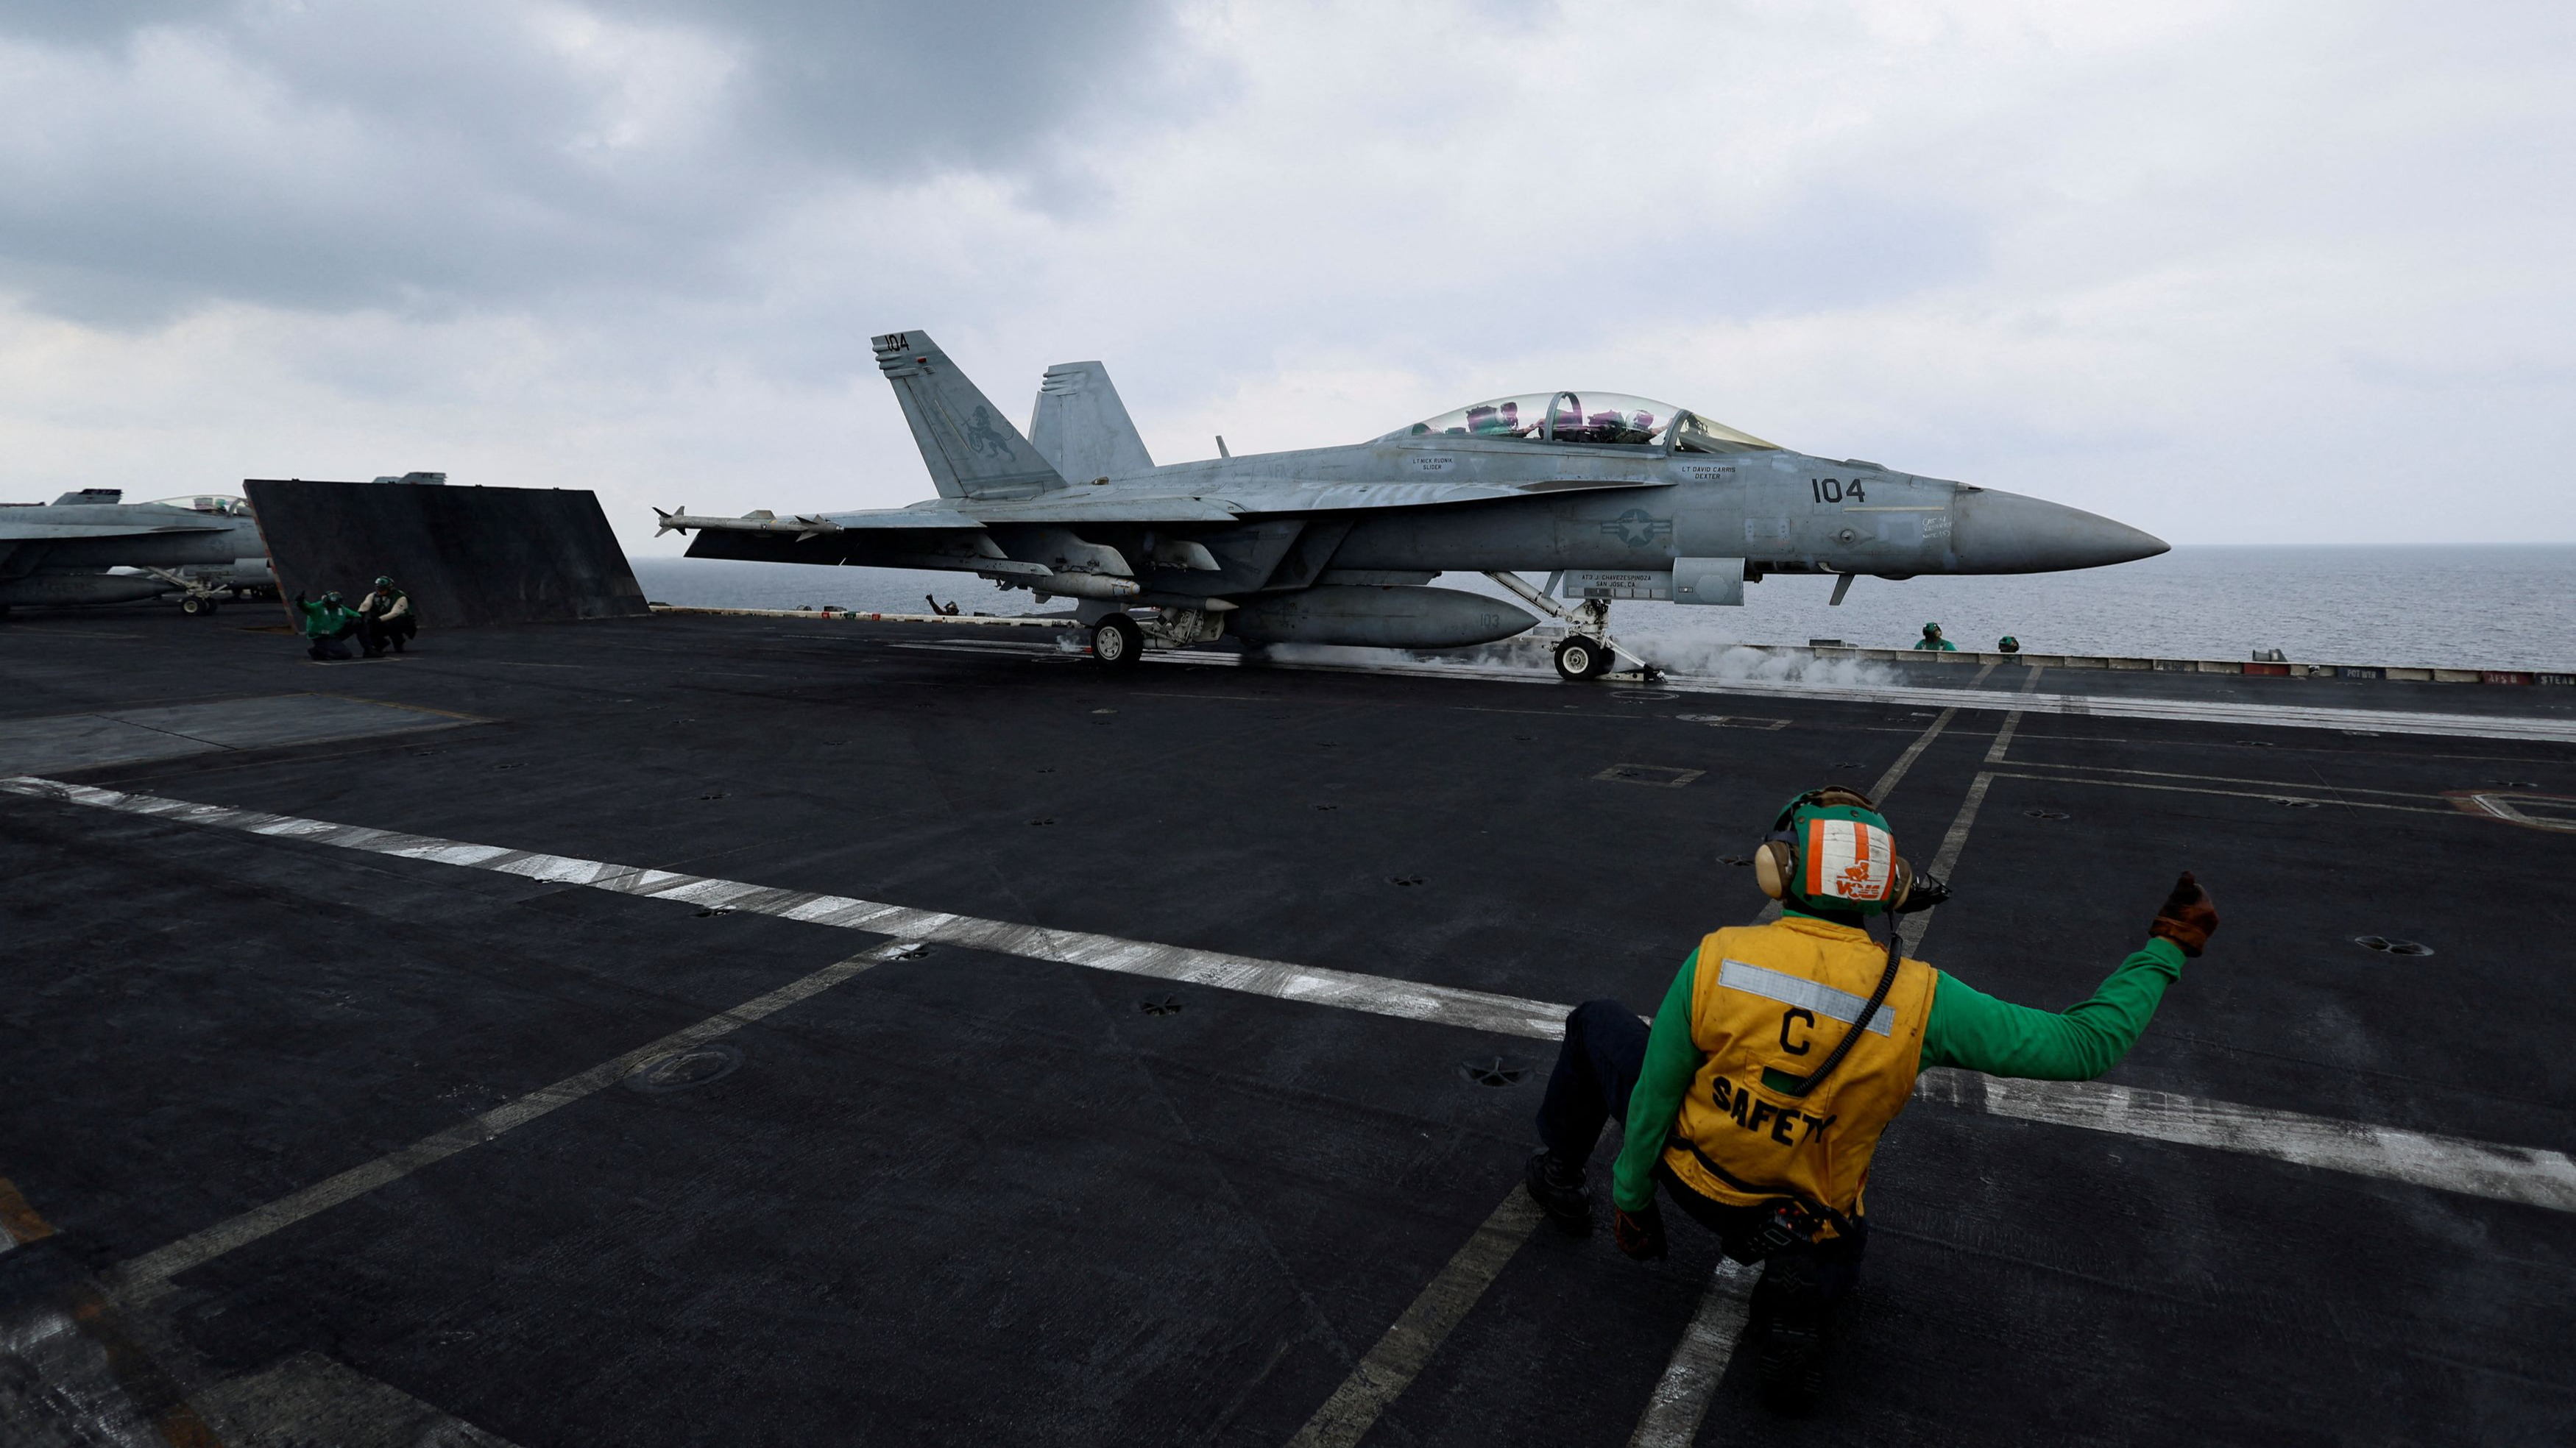 A flight operating crew member signals a F/A-18E Super Hornet fighter jet on the flight deck of the USS Dwight D. Eisenhower (CVN 69) aircraft carrier in Southern Red Sea, Middle East, February 13, 2024. /Reuters